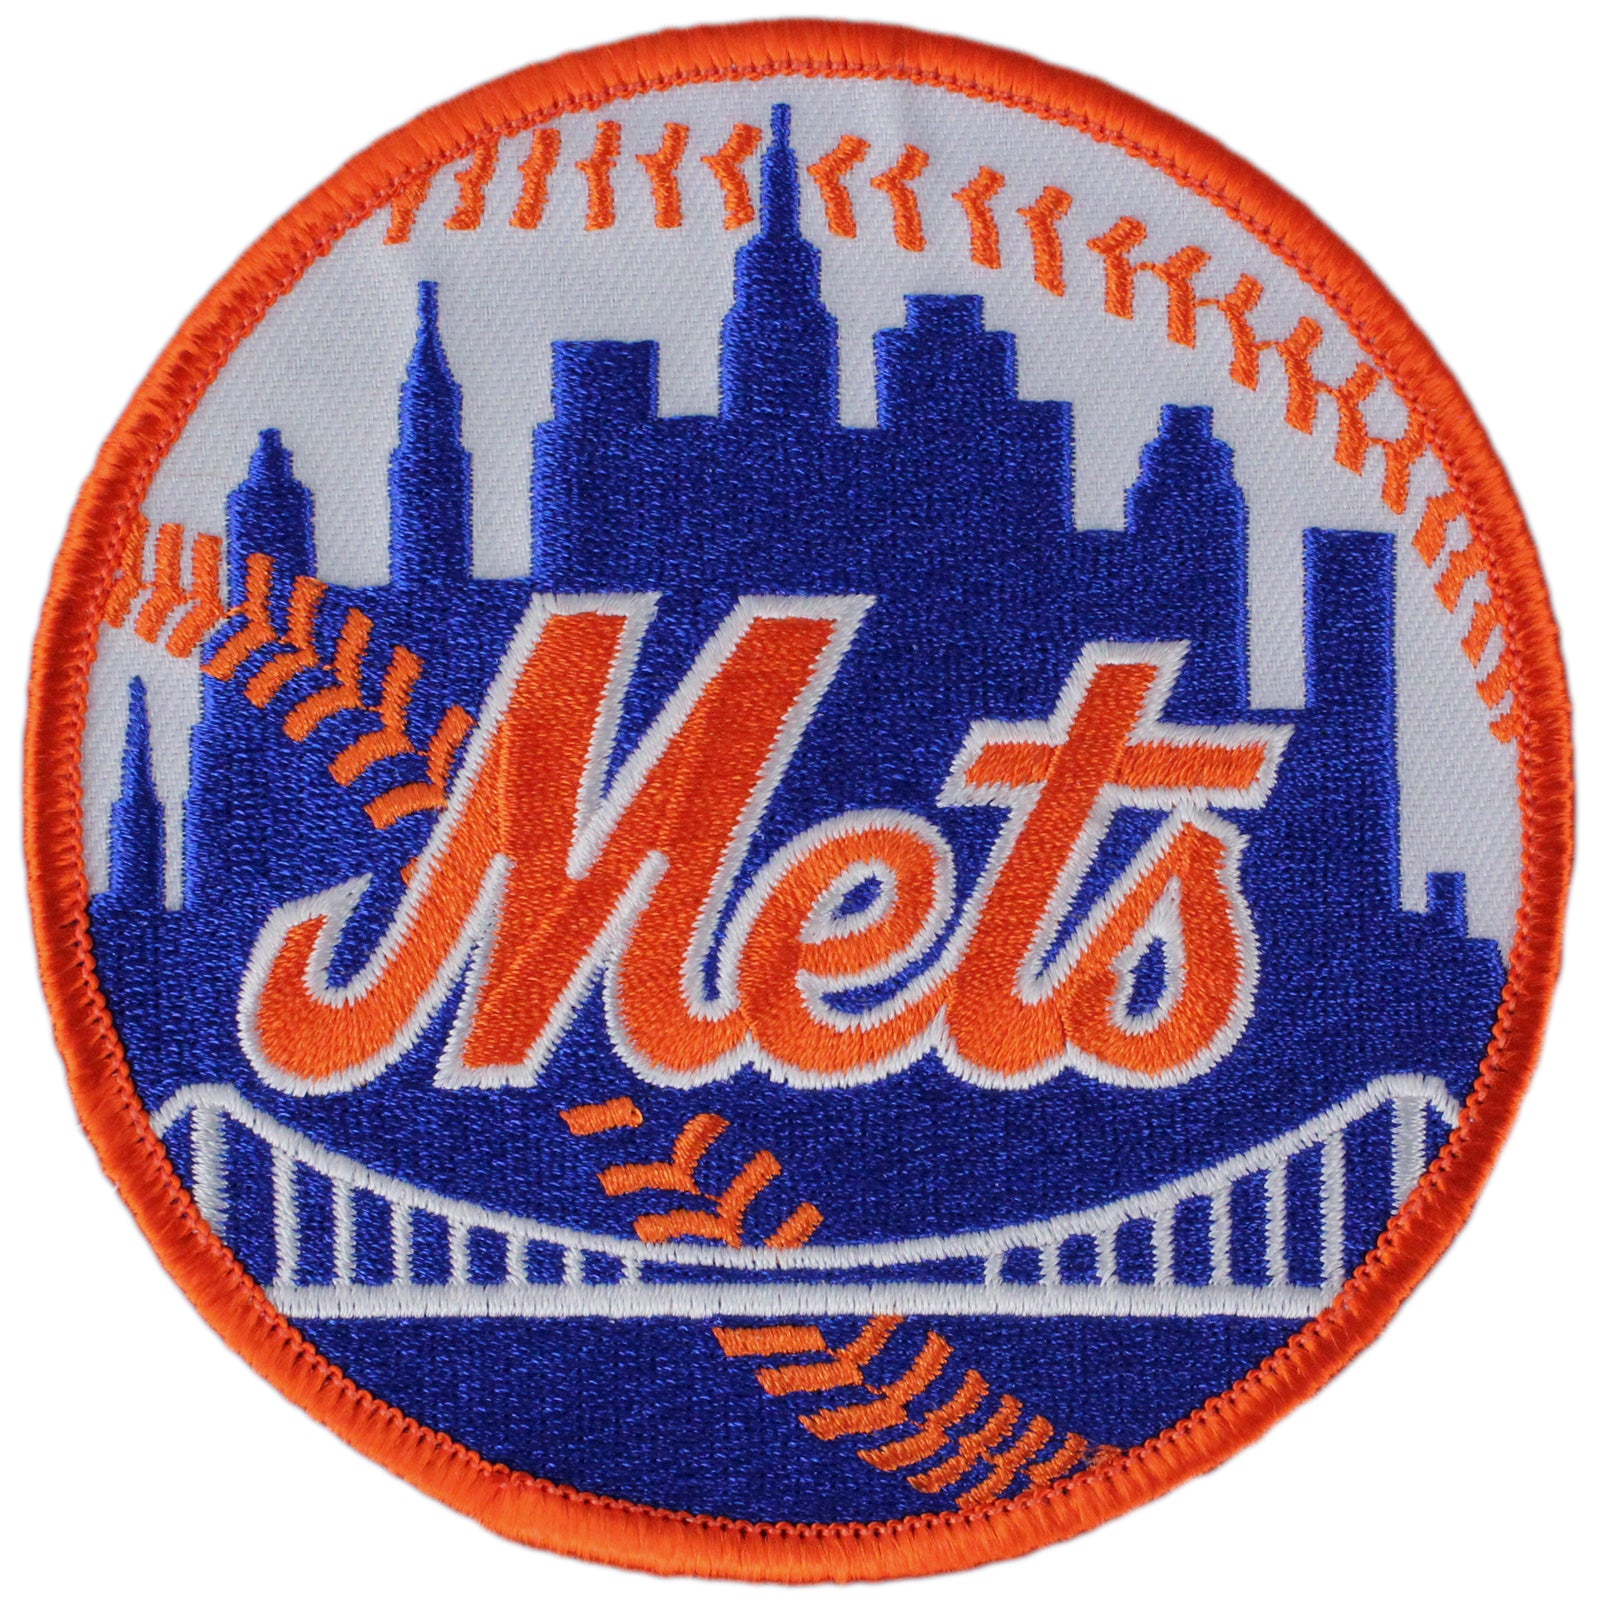 New York Mets - New York Mets added a new photo.